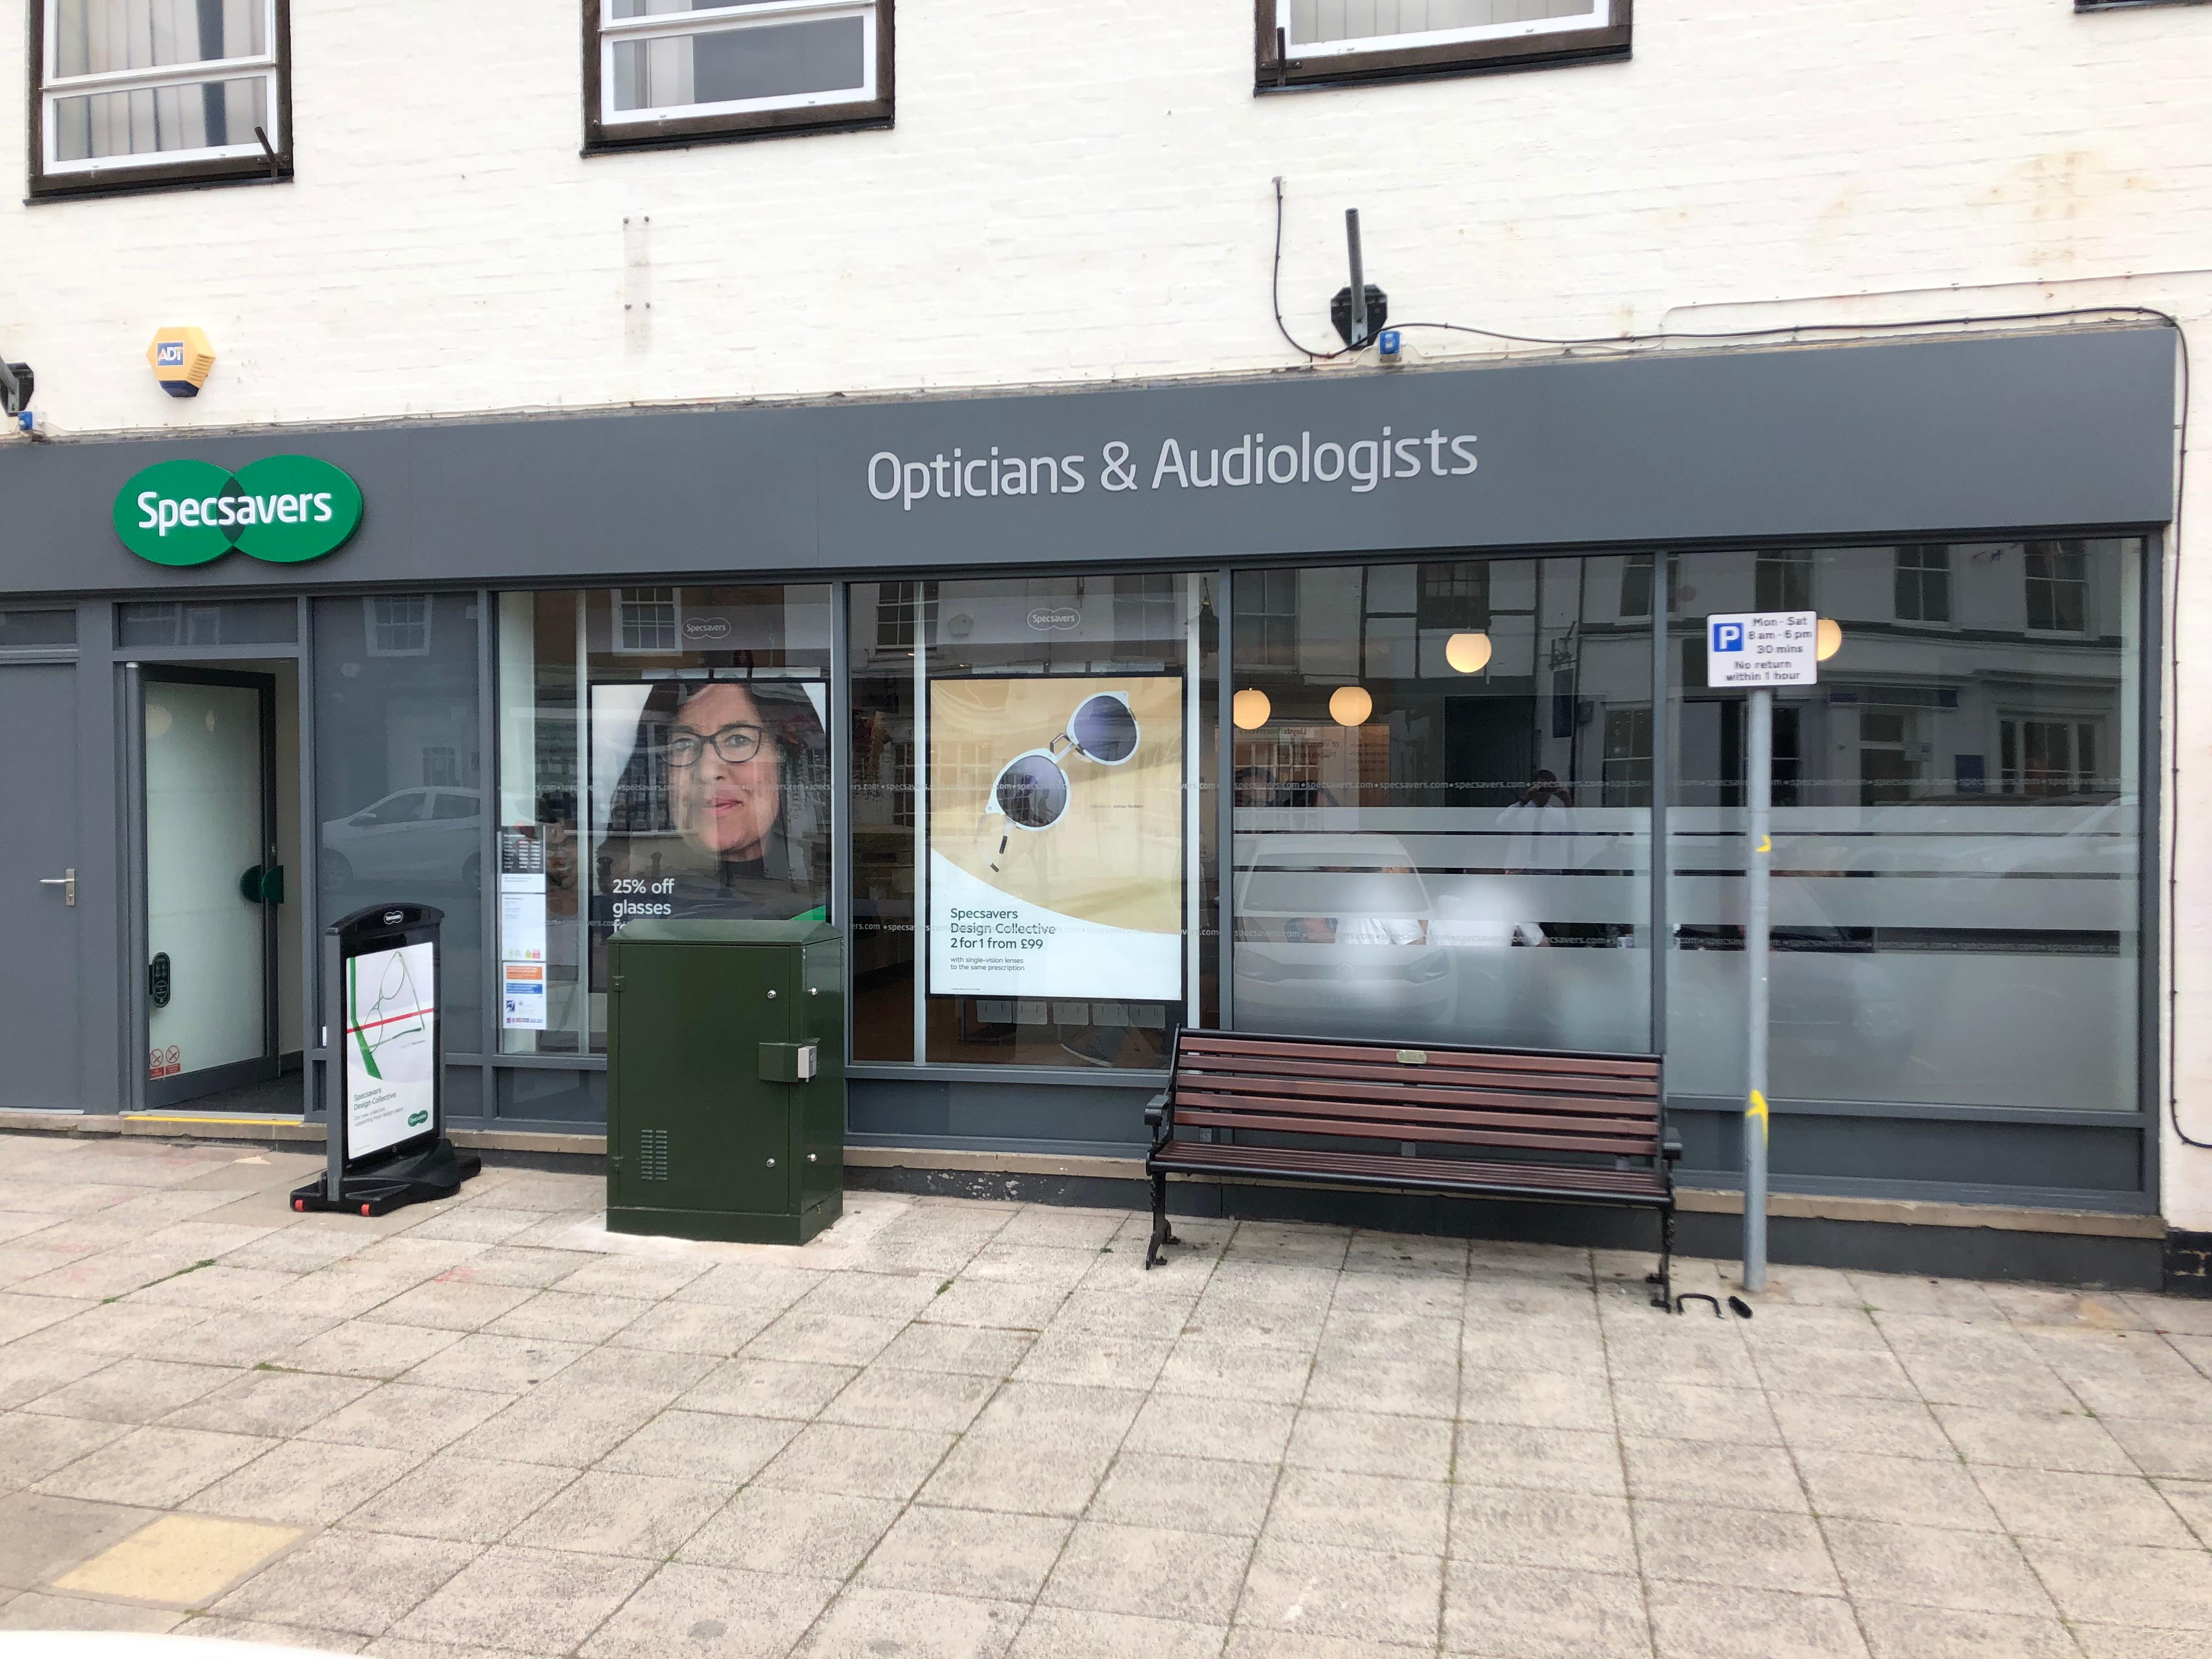 Images Specsavers Opticians and Audiologists - Alcester